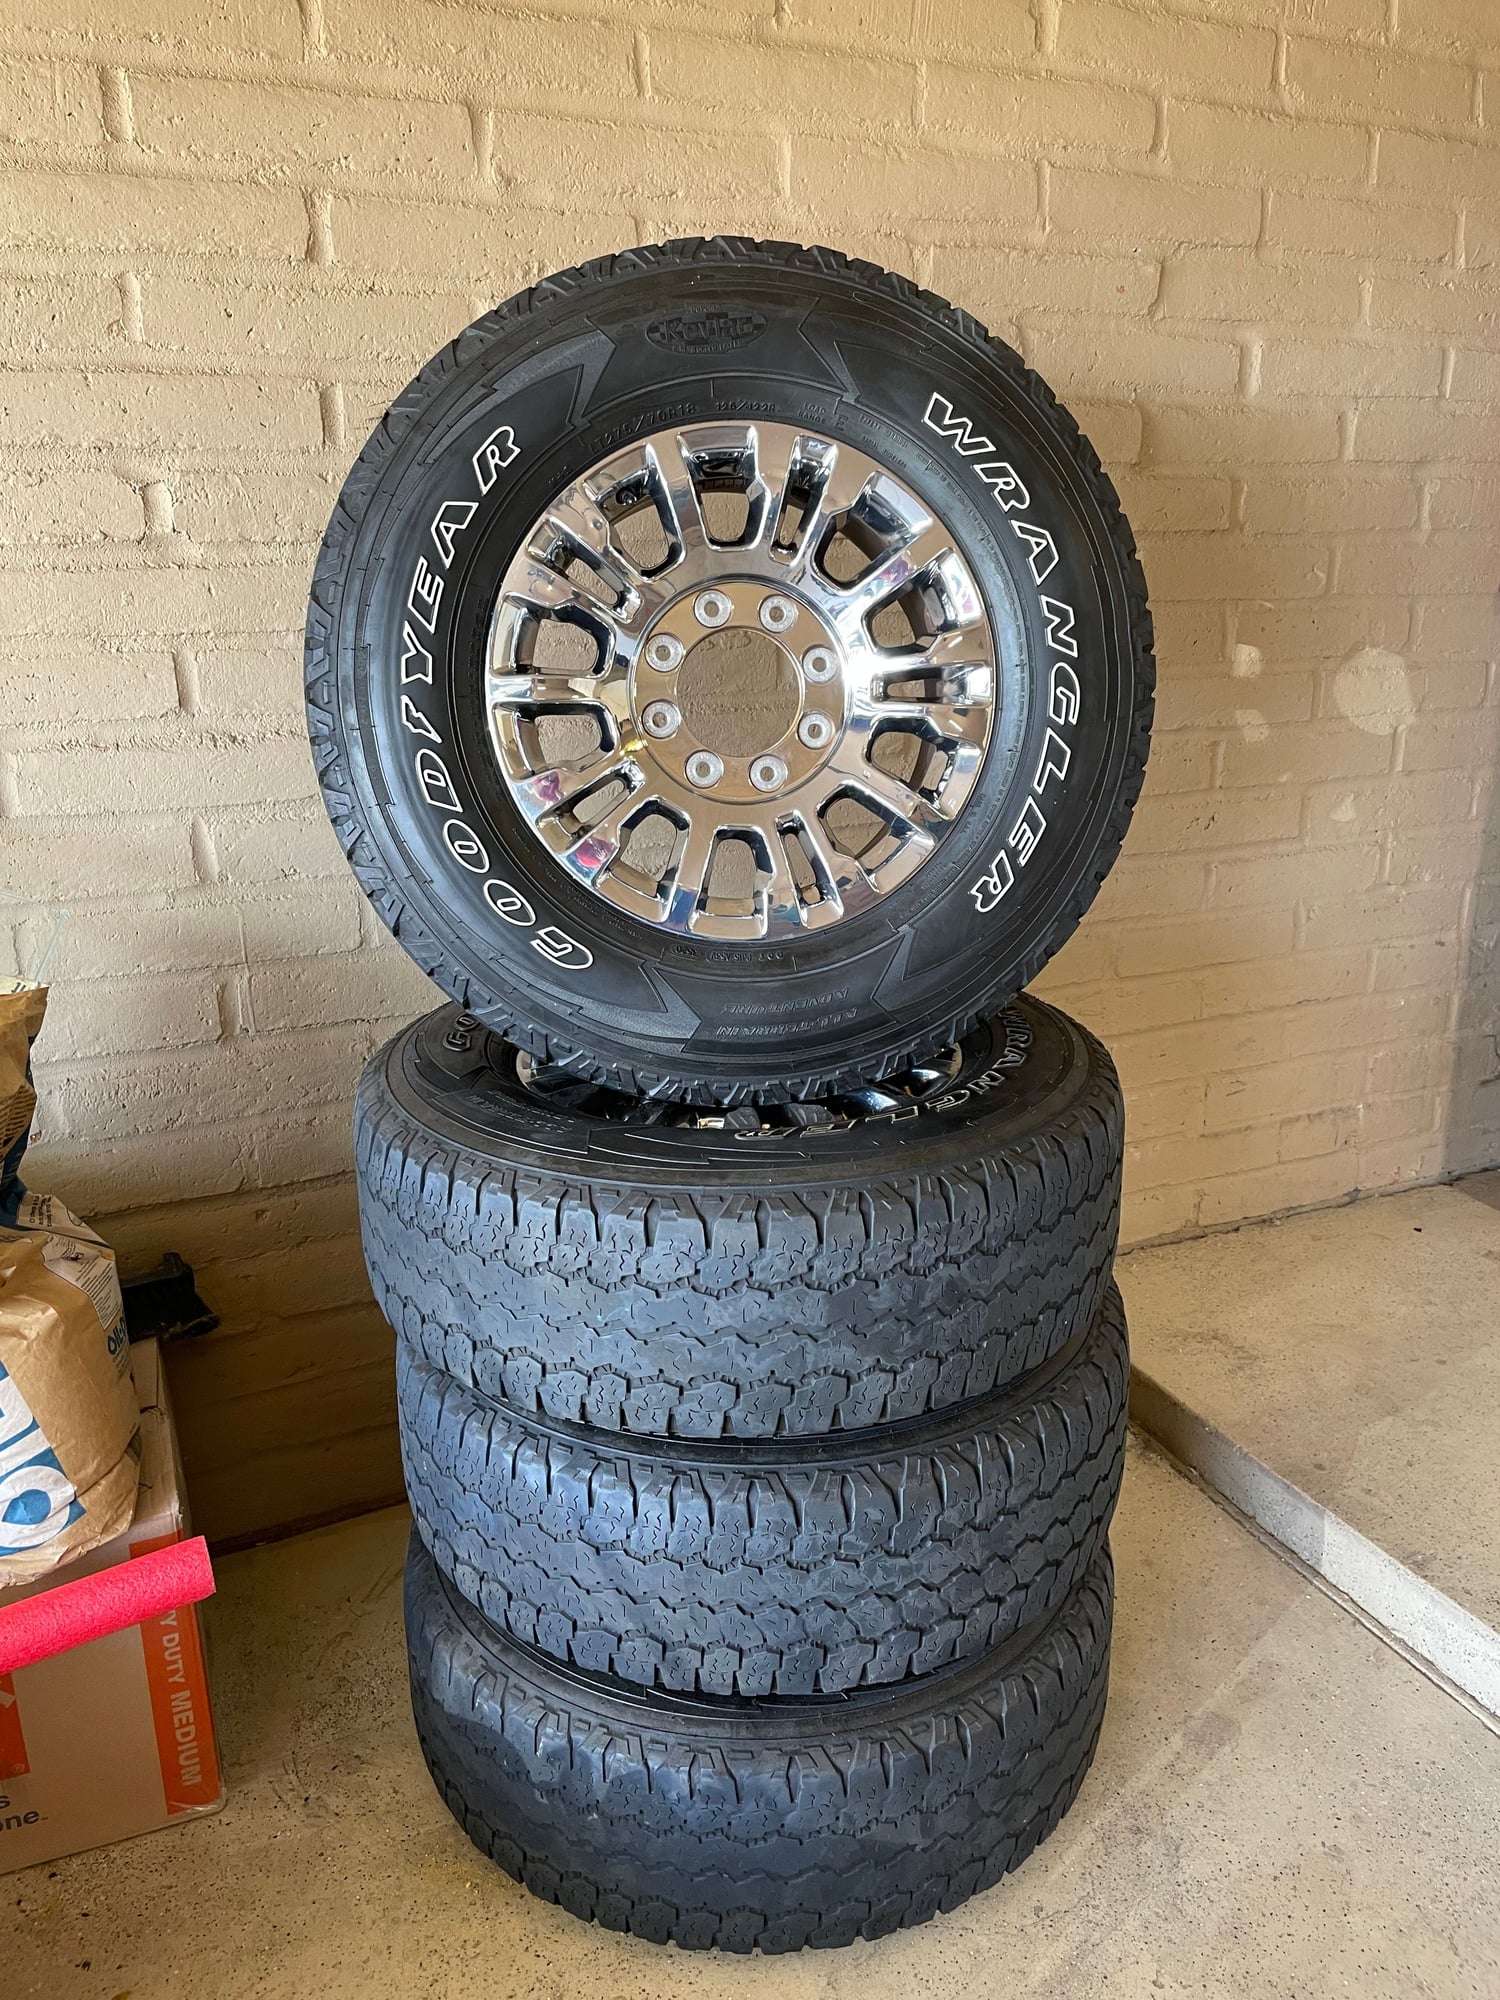 Wheels and Tires/Axles - 2020 F250 Wheels - Used - 0  All Models - Tucson, AZ 85750, United States